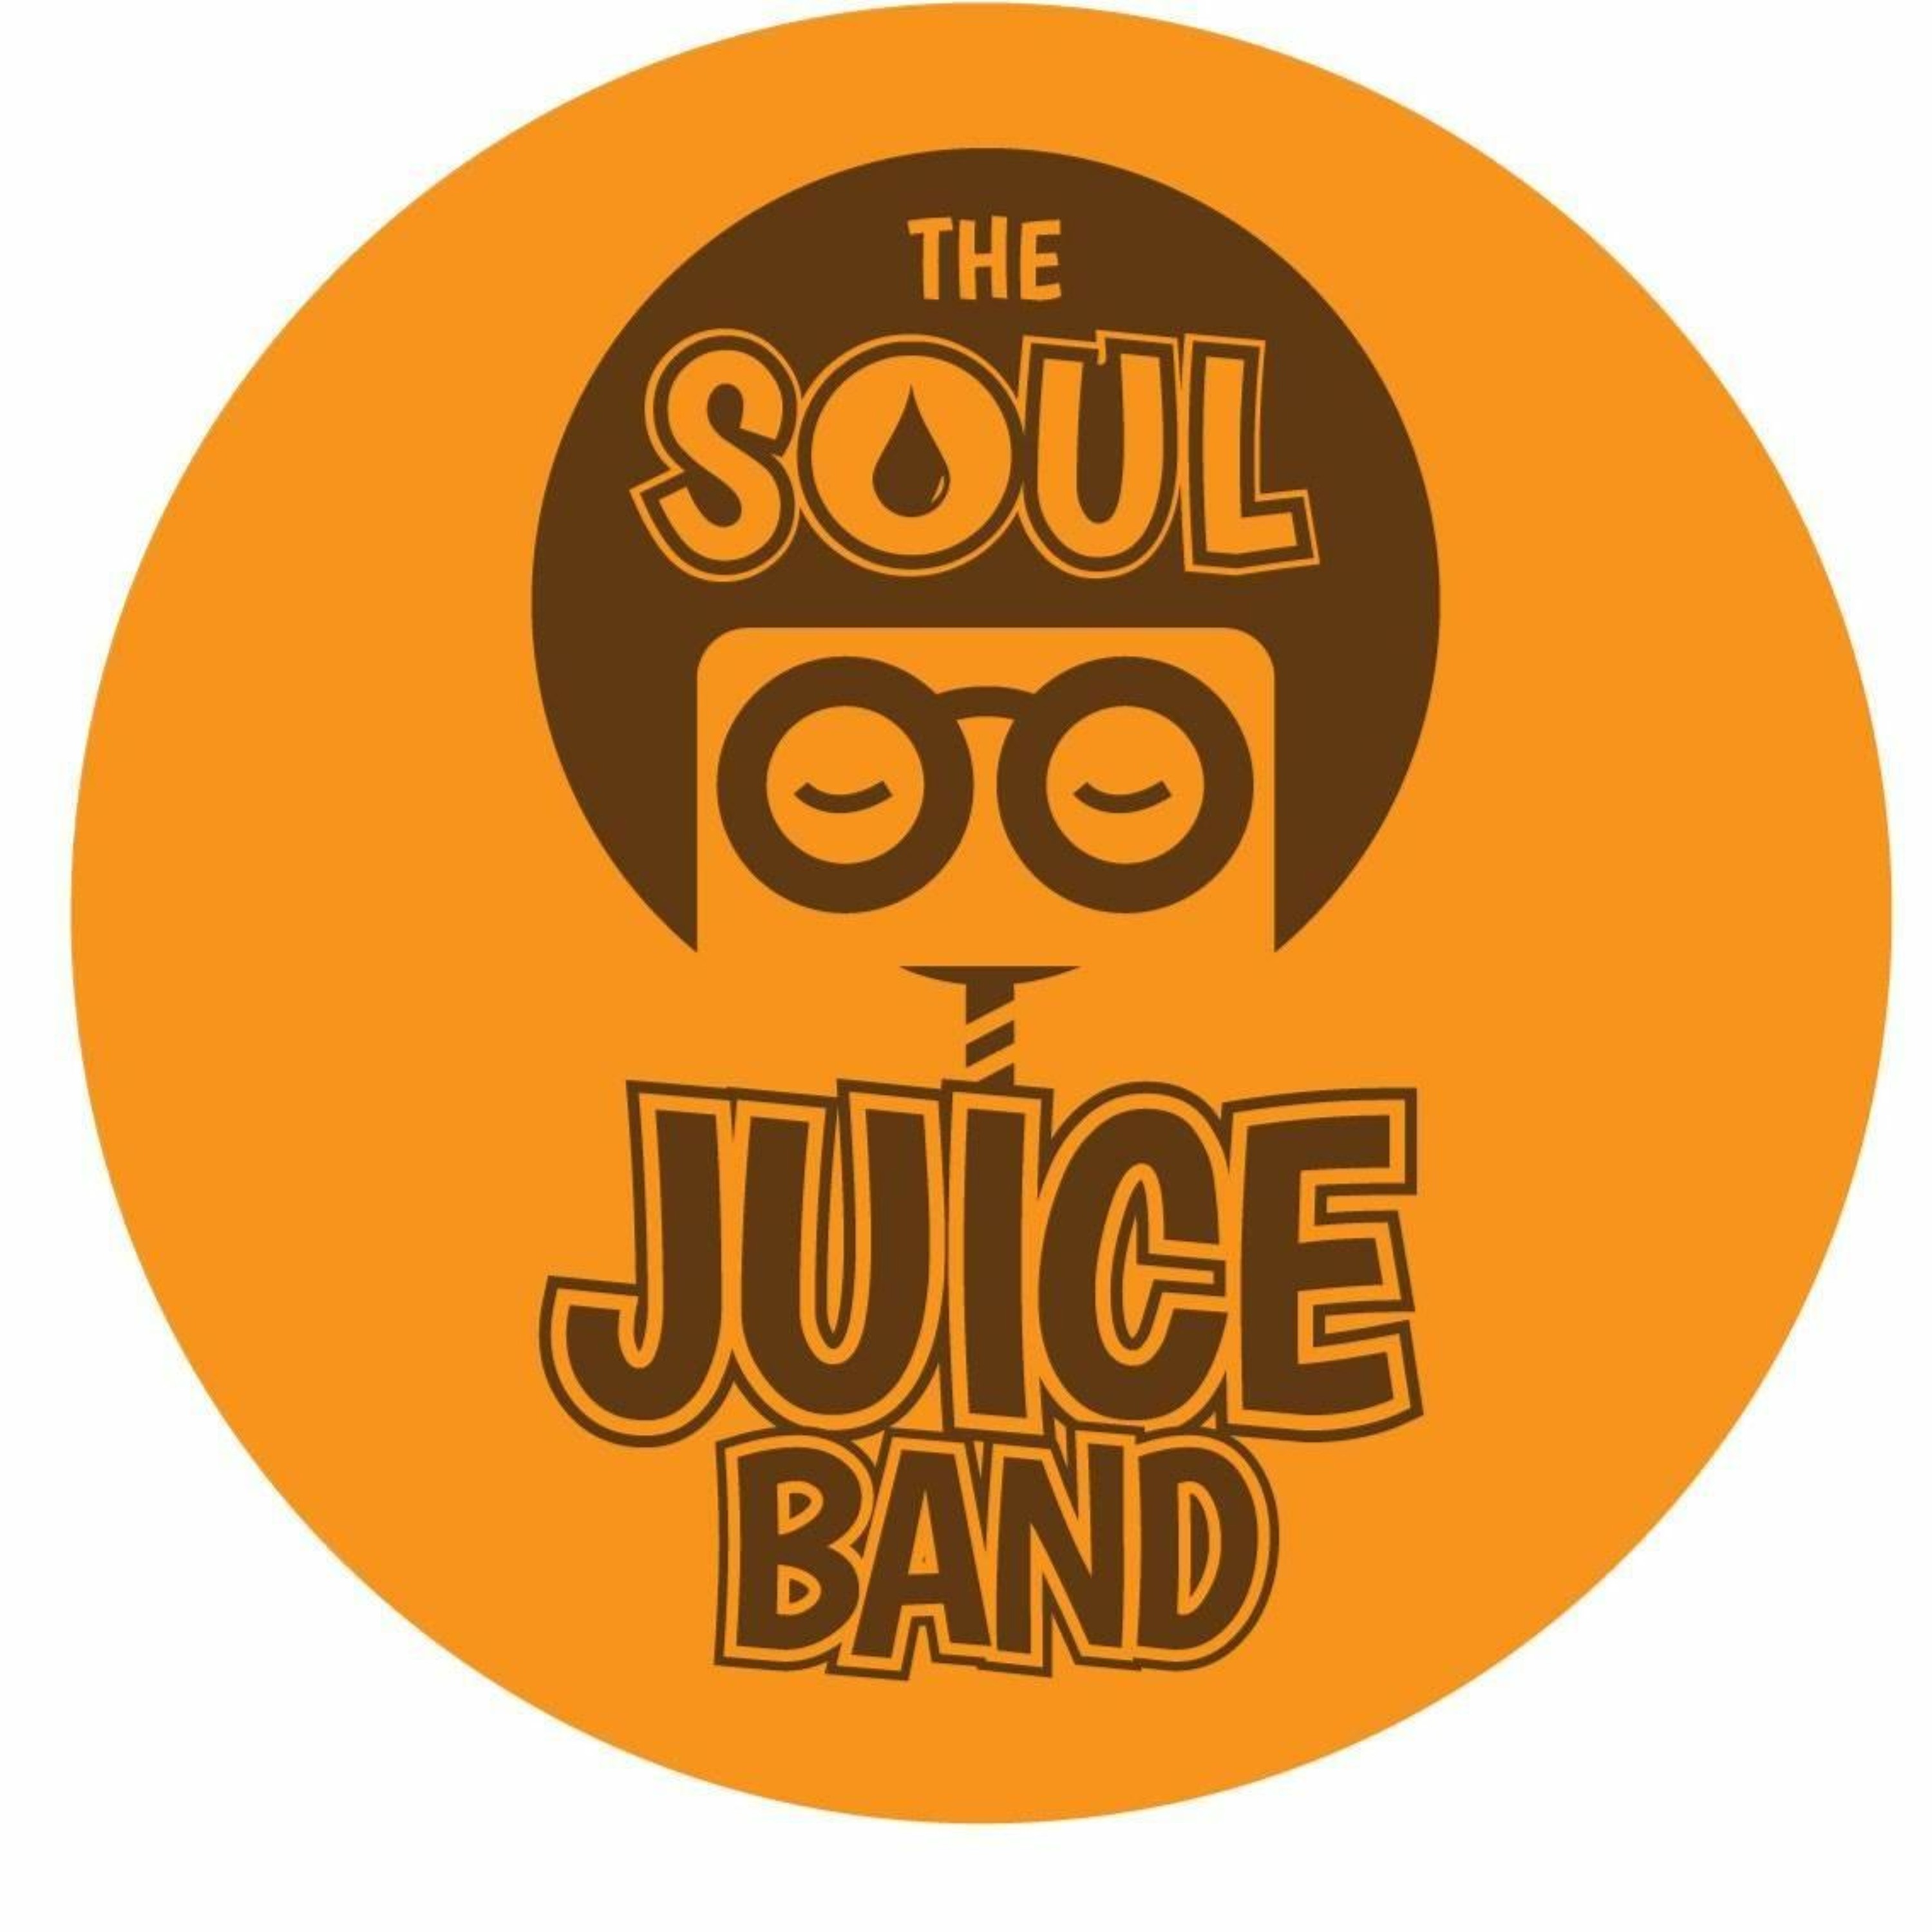 VNS PODCAST - FROM NOVEMBER 6, 2021 - THE SOUL JUICE BAND